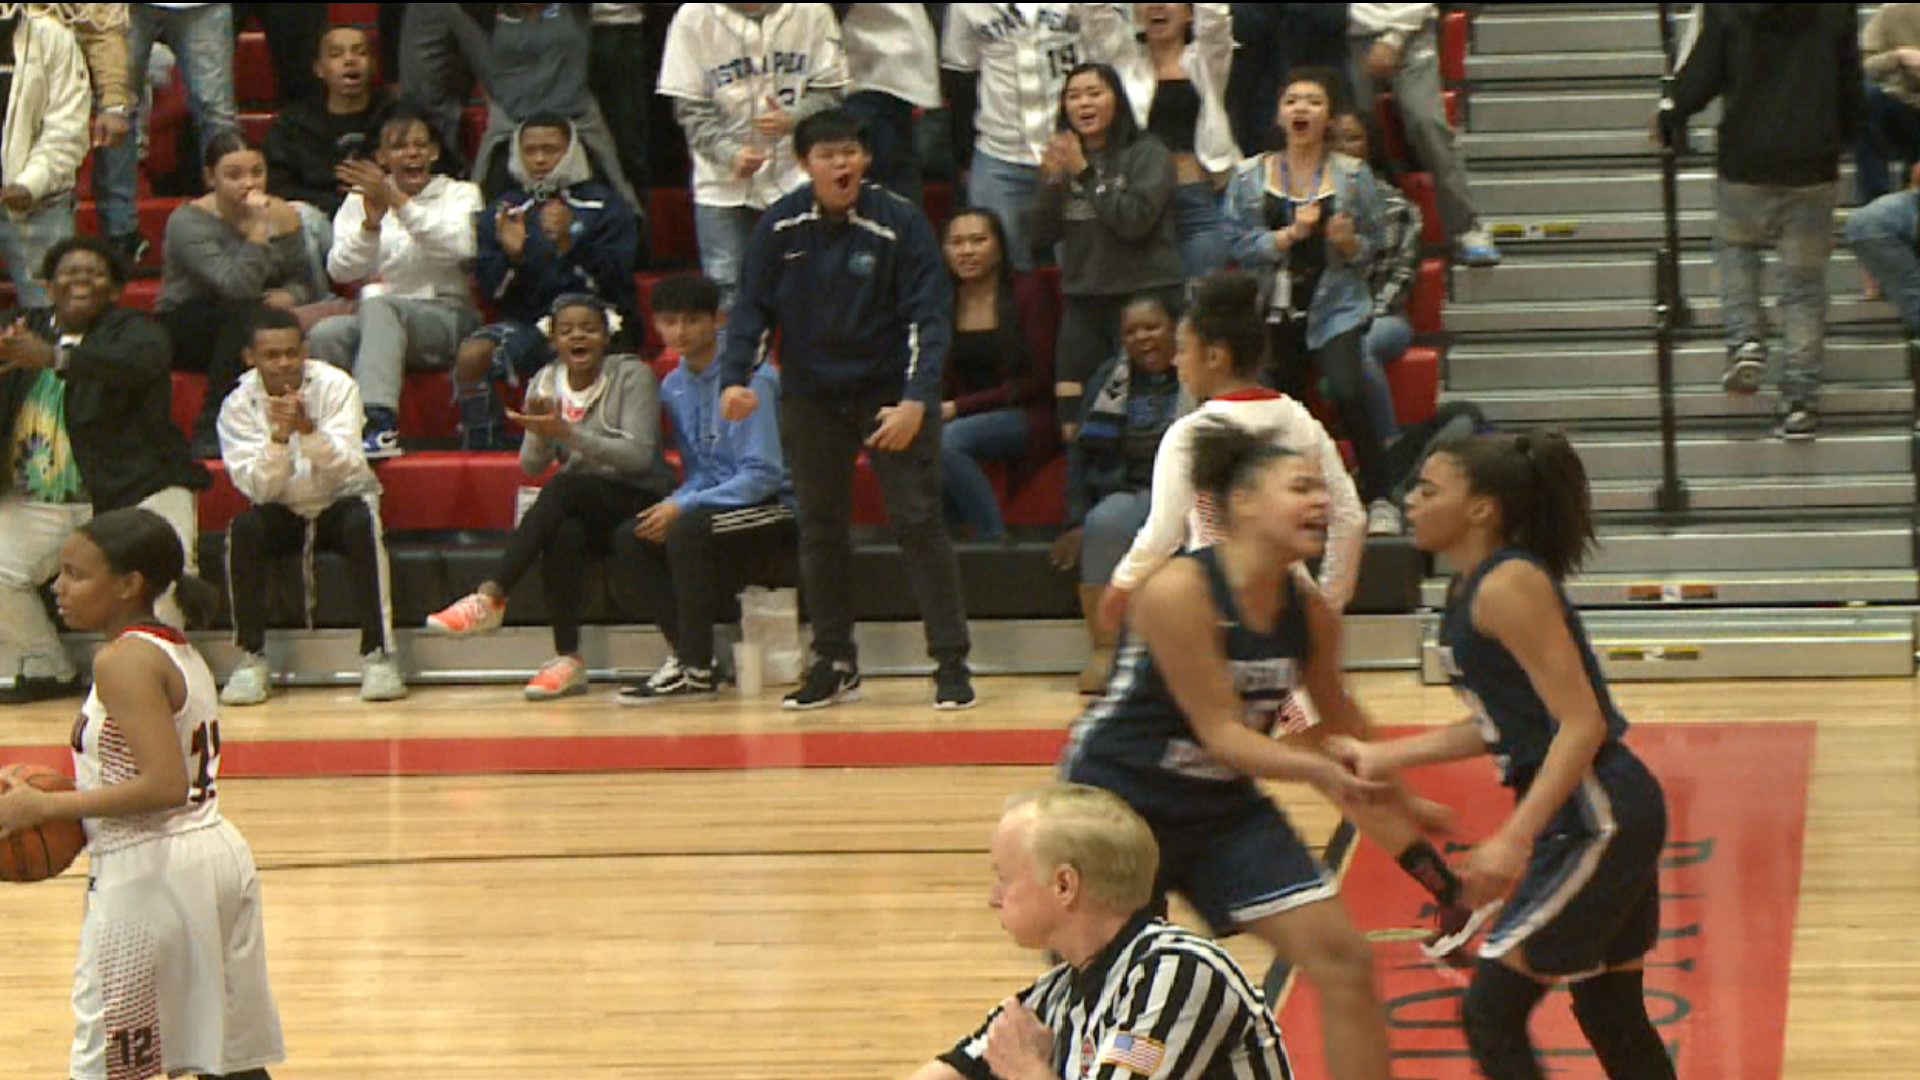 The Vista PEAK girls basketball team edged Rangeview 75-71 in a rivalry game on Thursday night